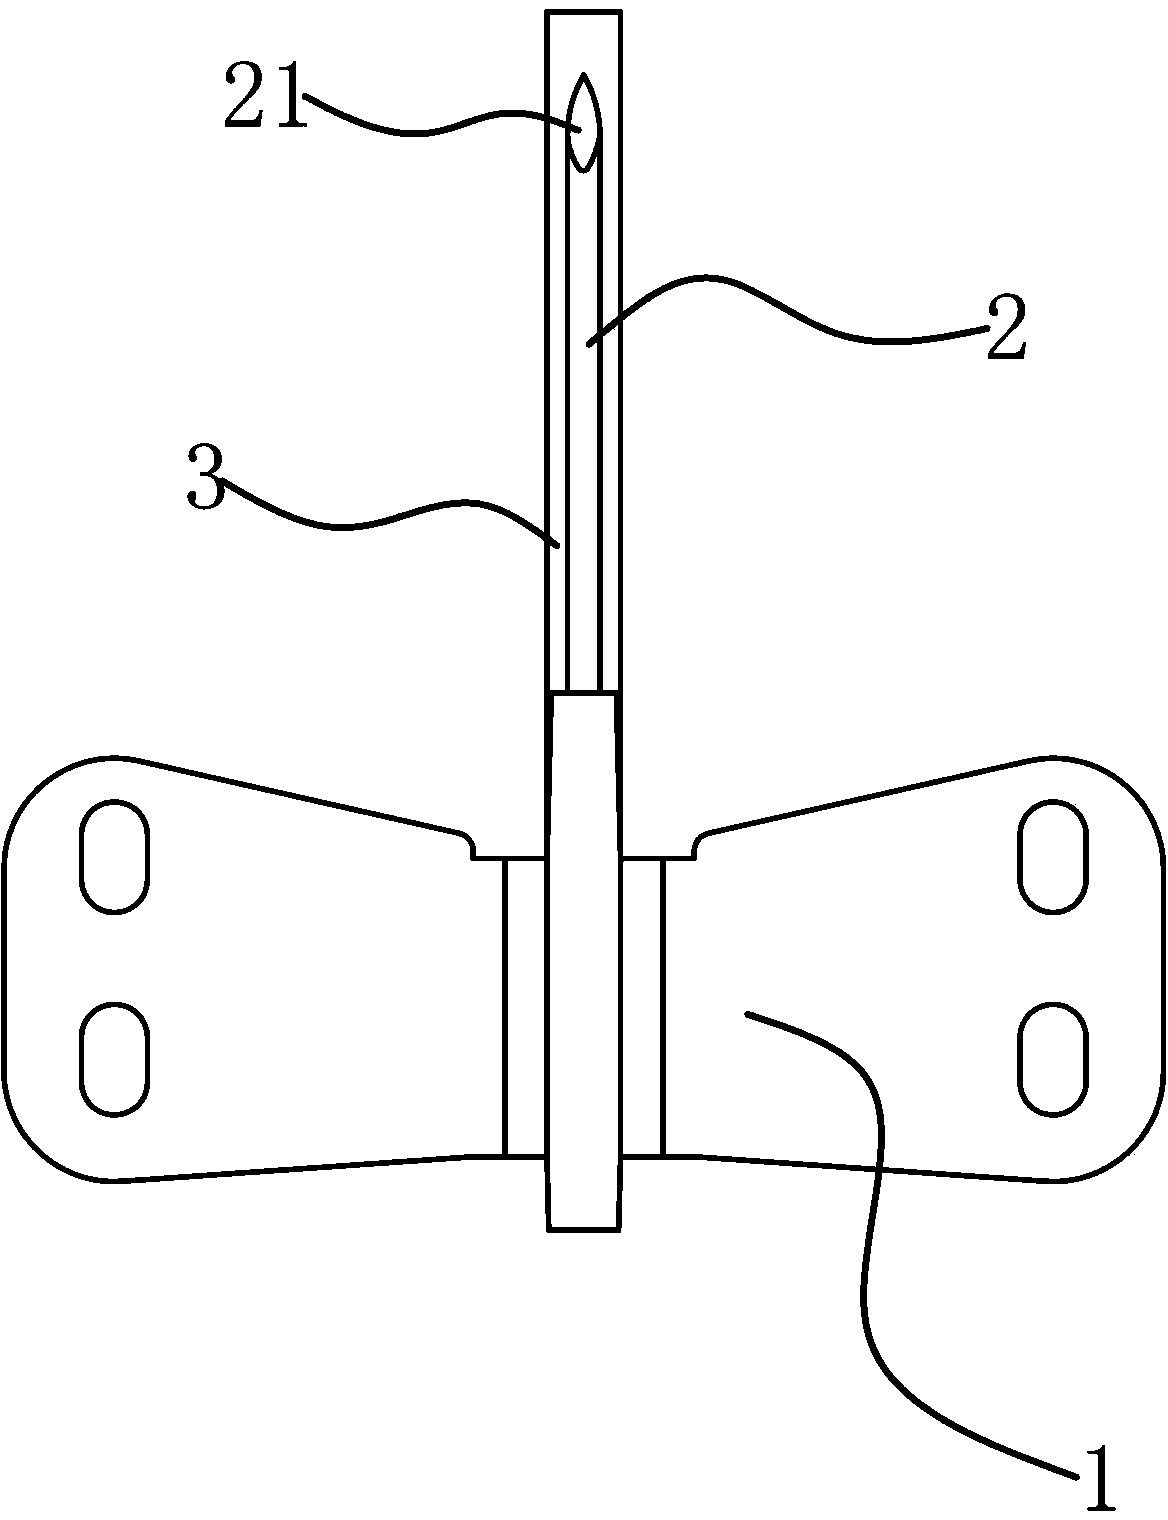 Assembly technology of split type medical intravenous needle